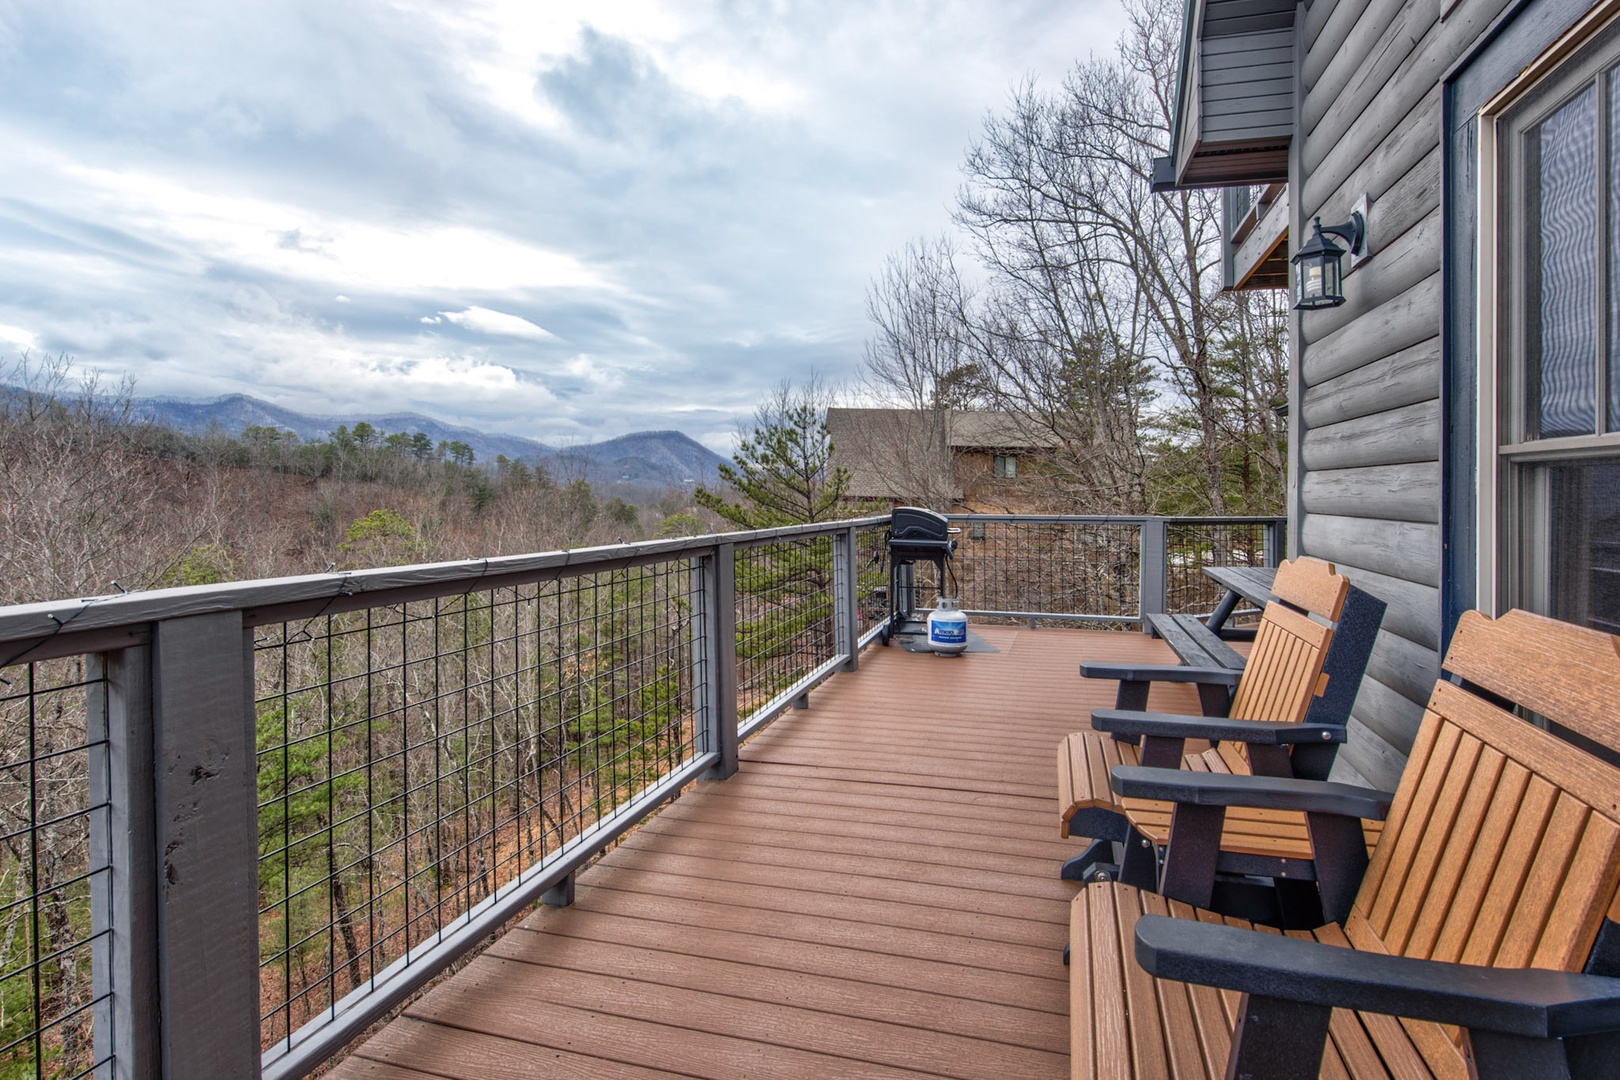 Lounge in comfort with stunning views on the deck while you grill up a feast!